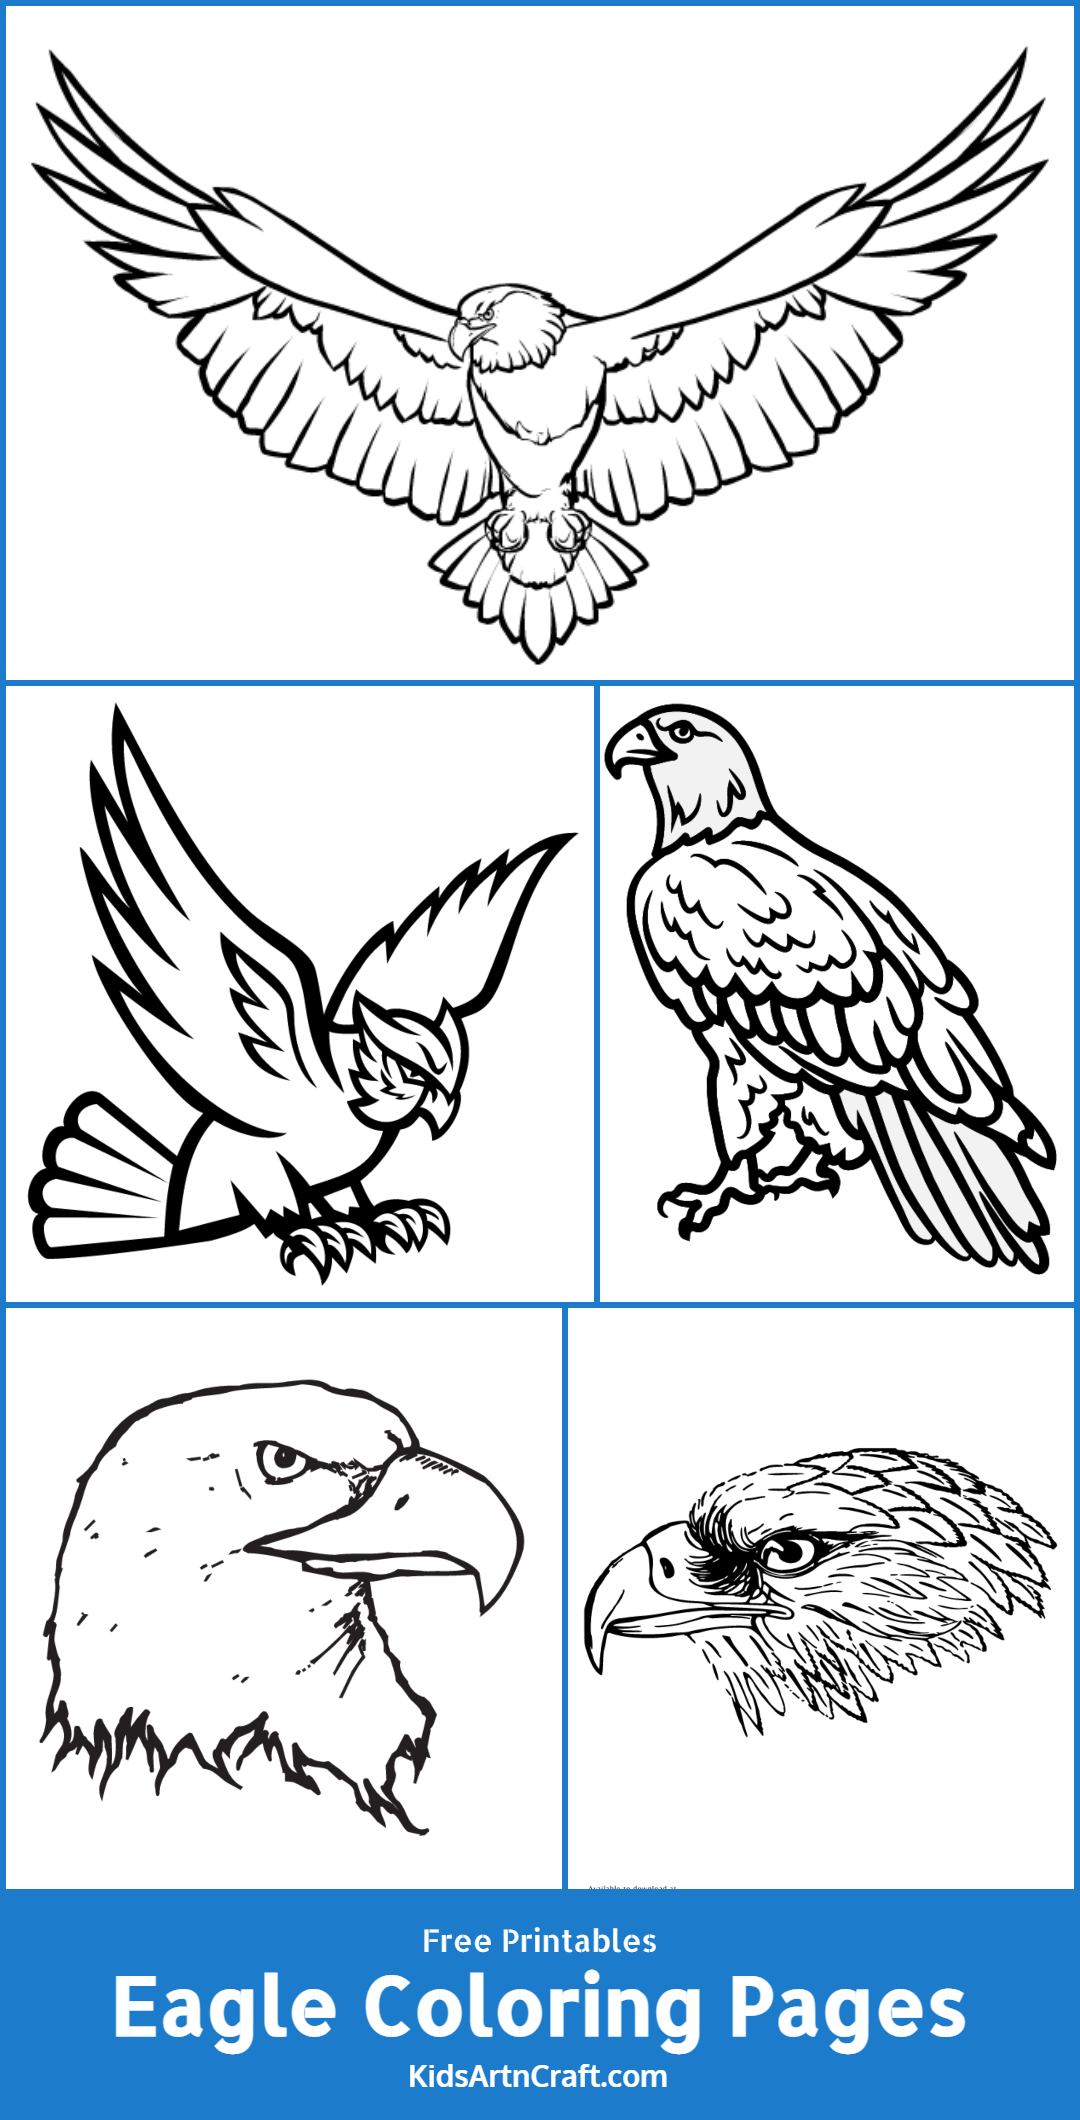 Eagle Coloring Pages For Kids – Free Printables